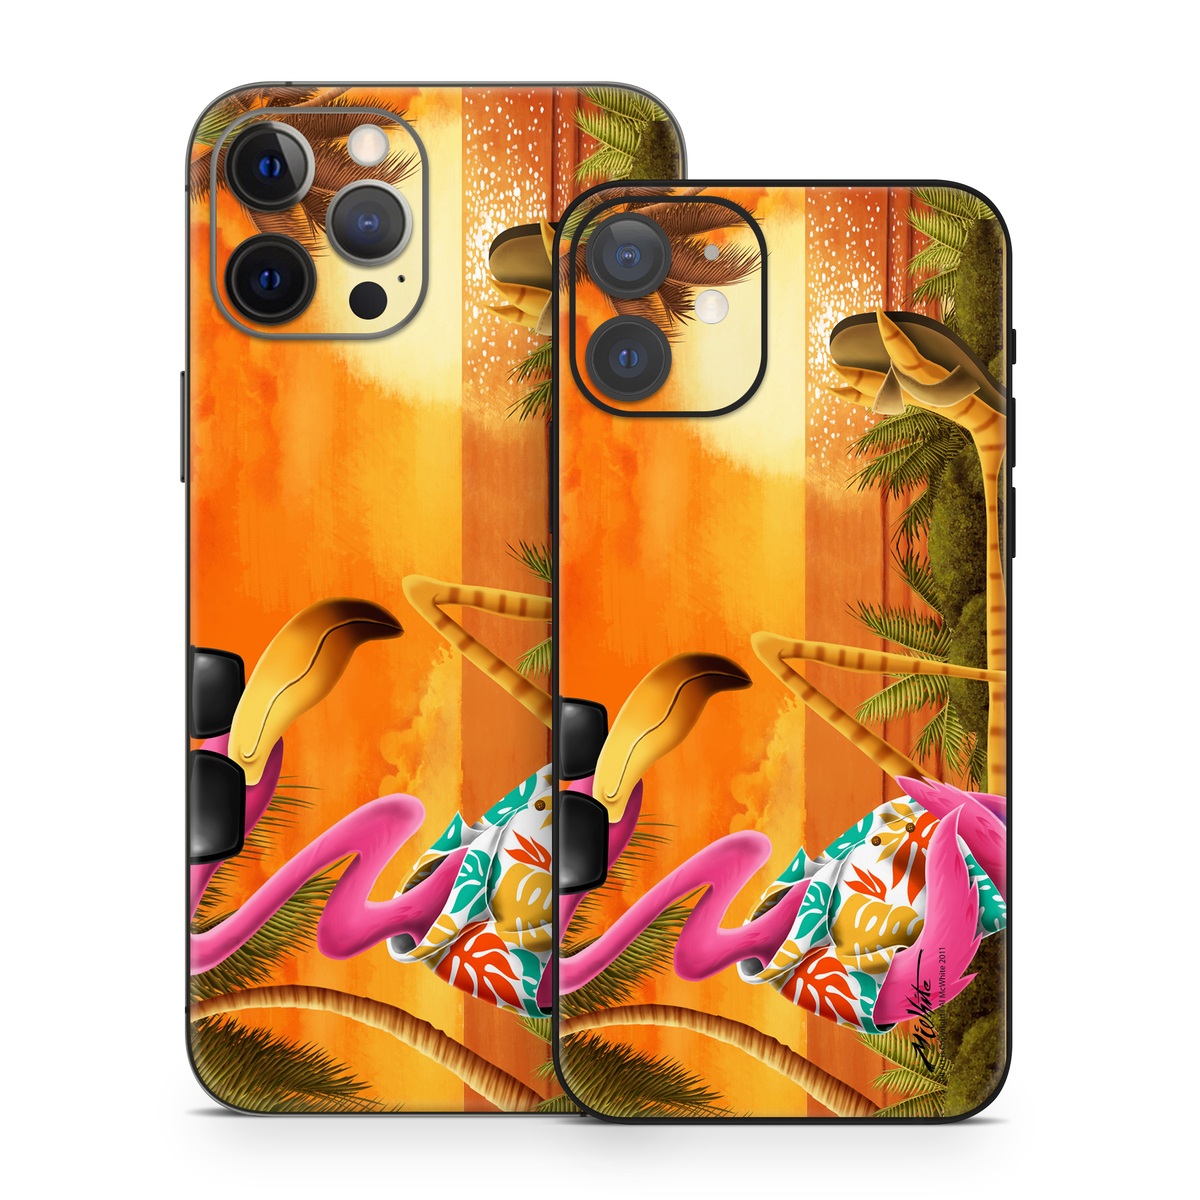 iPhone 12 Series Skin design of Cartoon, Art, Animation, Illustration, Plant, Cg artwork, Shoe, Fictional character, with red, orange, green, black, pink colors